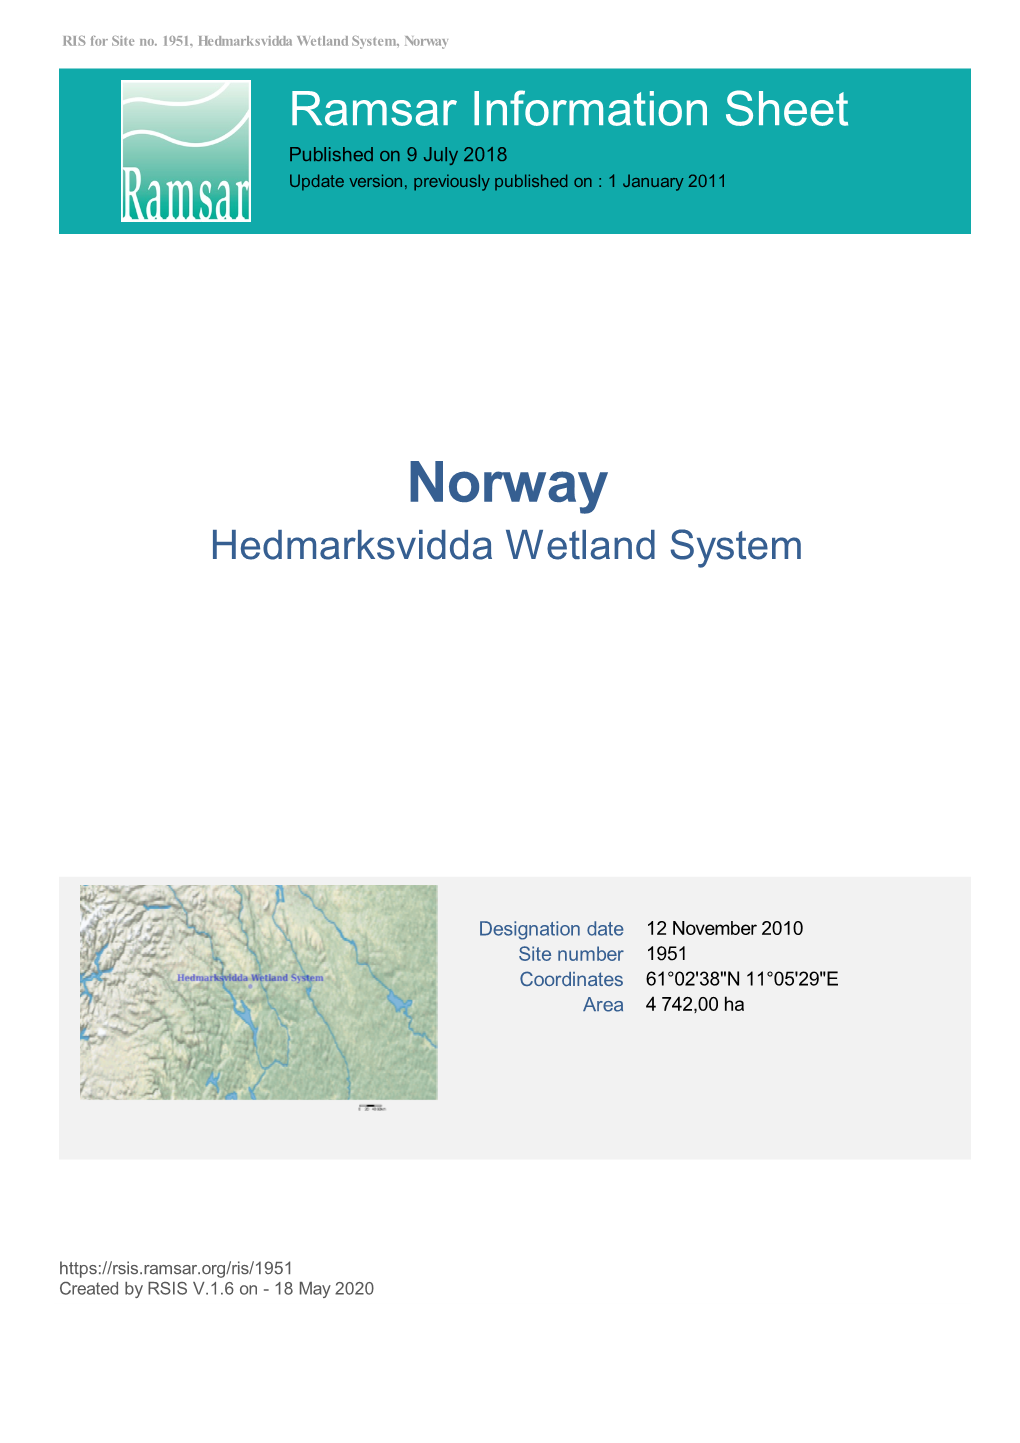 Norway Ramsar Information Sheet Published on 9 July 2018 Update Version, Previously Published on : 1 January 2011